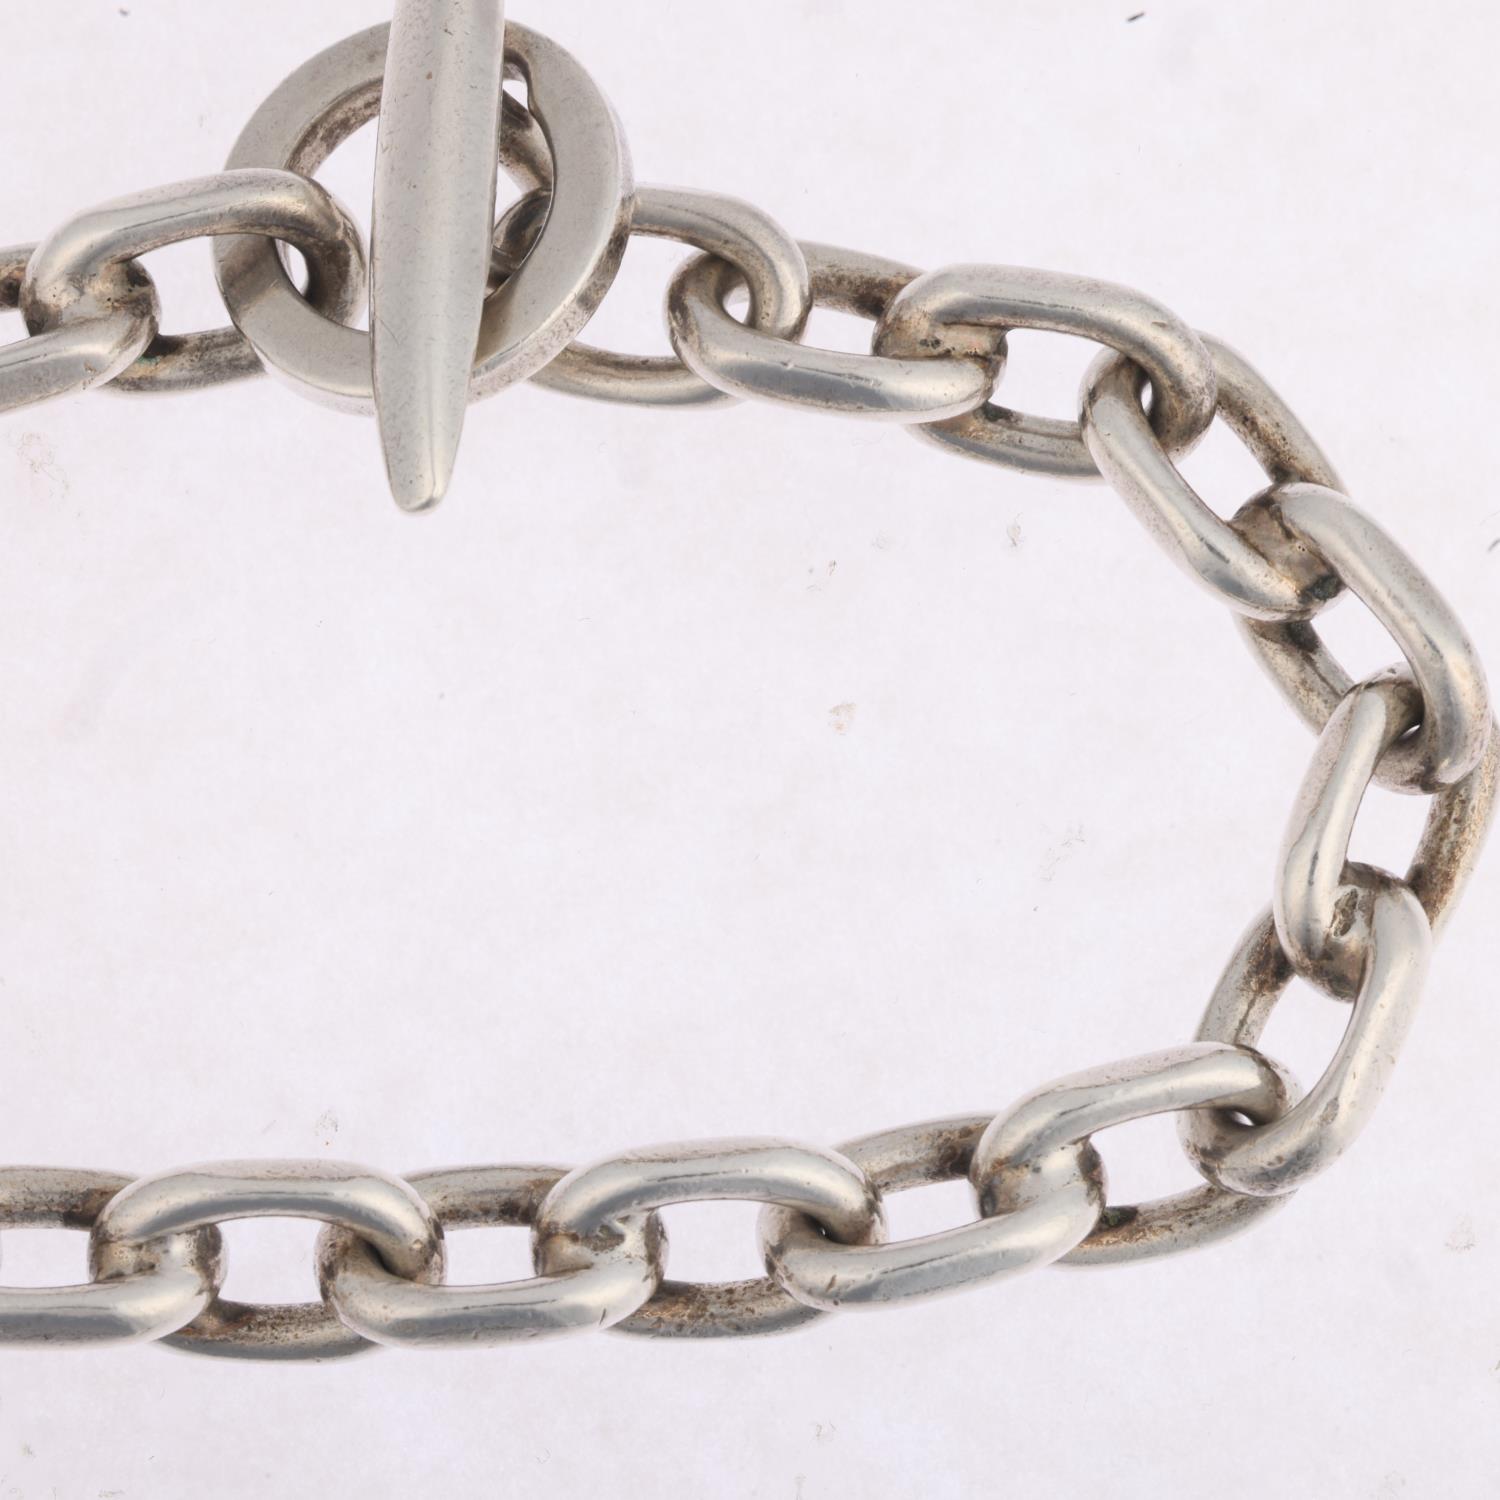 RANDERS SOLVVAREFABRIK - a heavy Danish sterling silver anchor cable link chain bracelet, 20.5cm, - Image 2 of 3